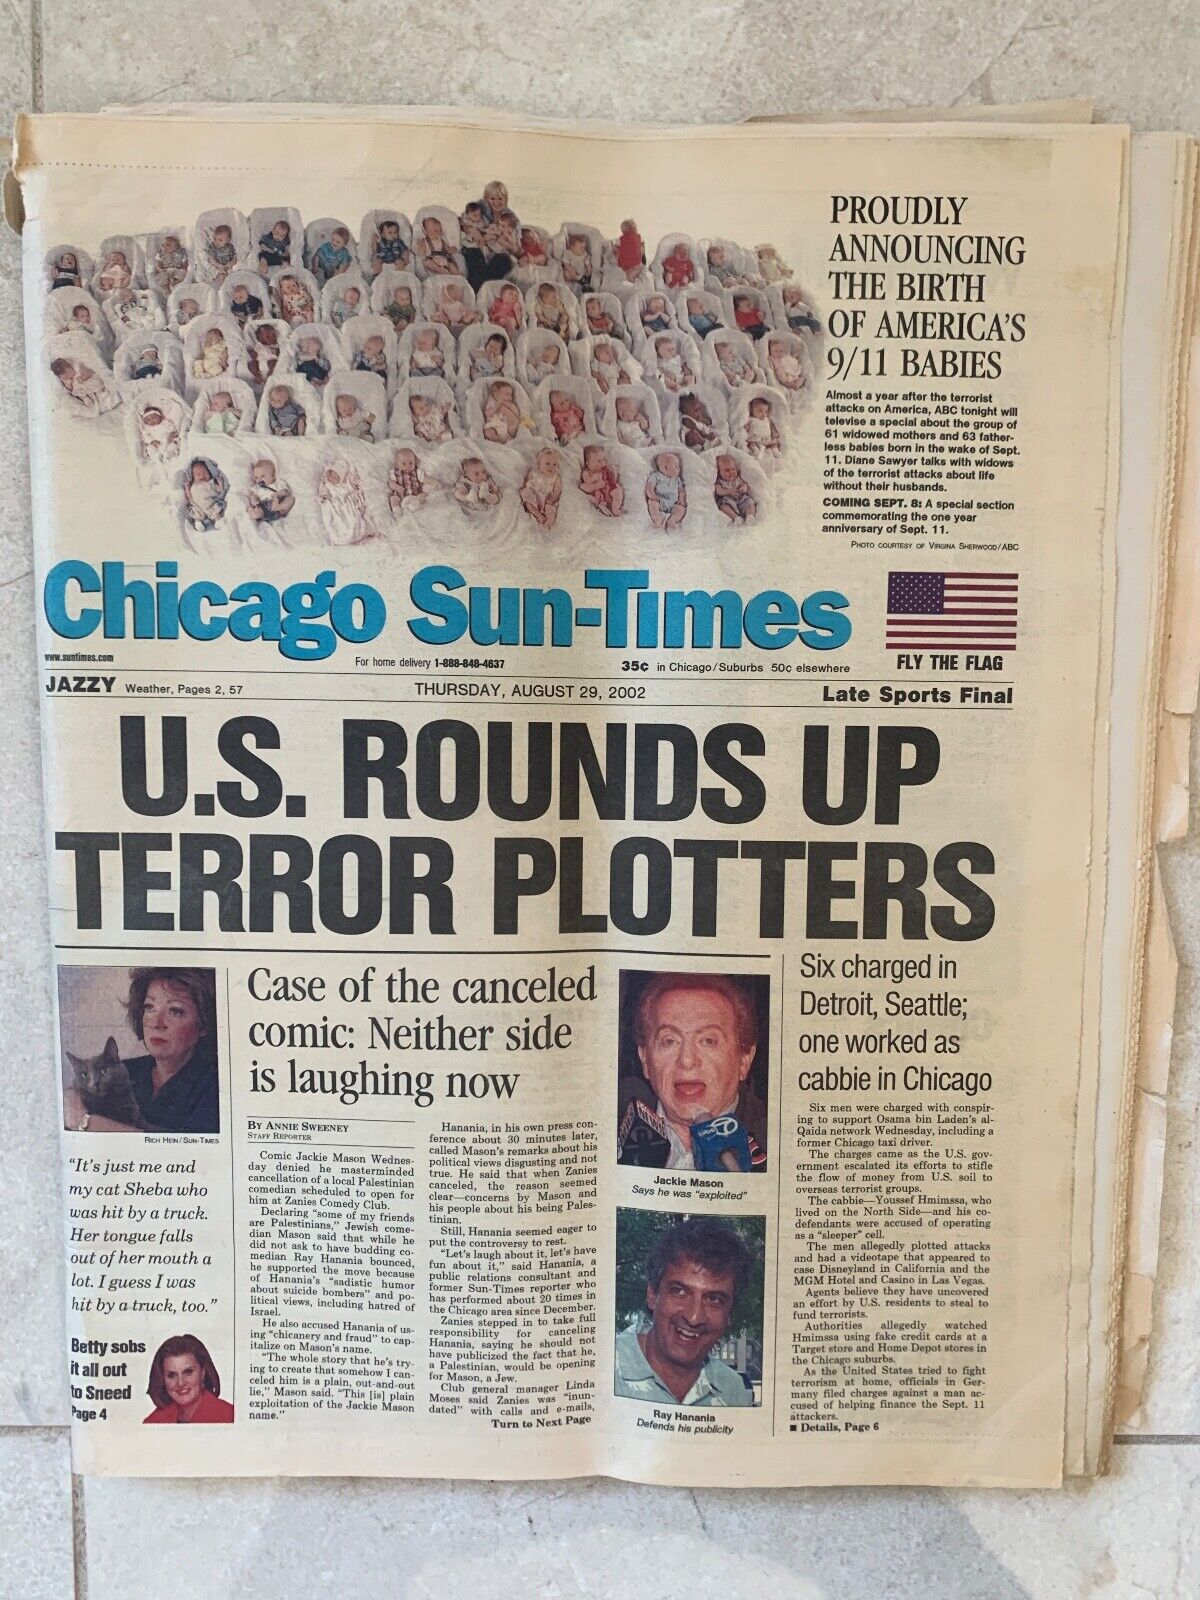 VTG CHICAGO SUN-TIMES AUGUST 29 2002 US Rounds up Terror Plotters 9/11 Newspaper